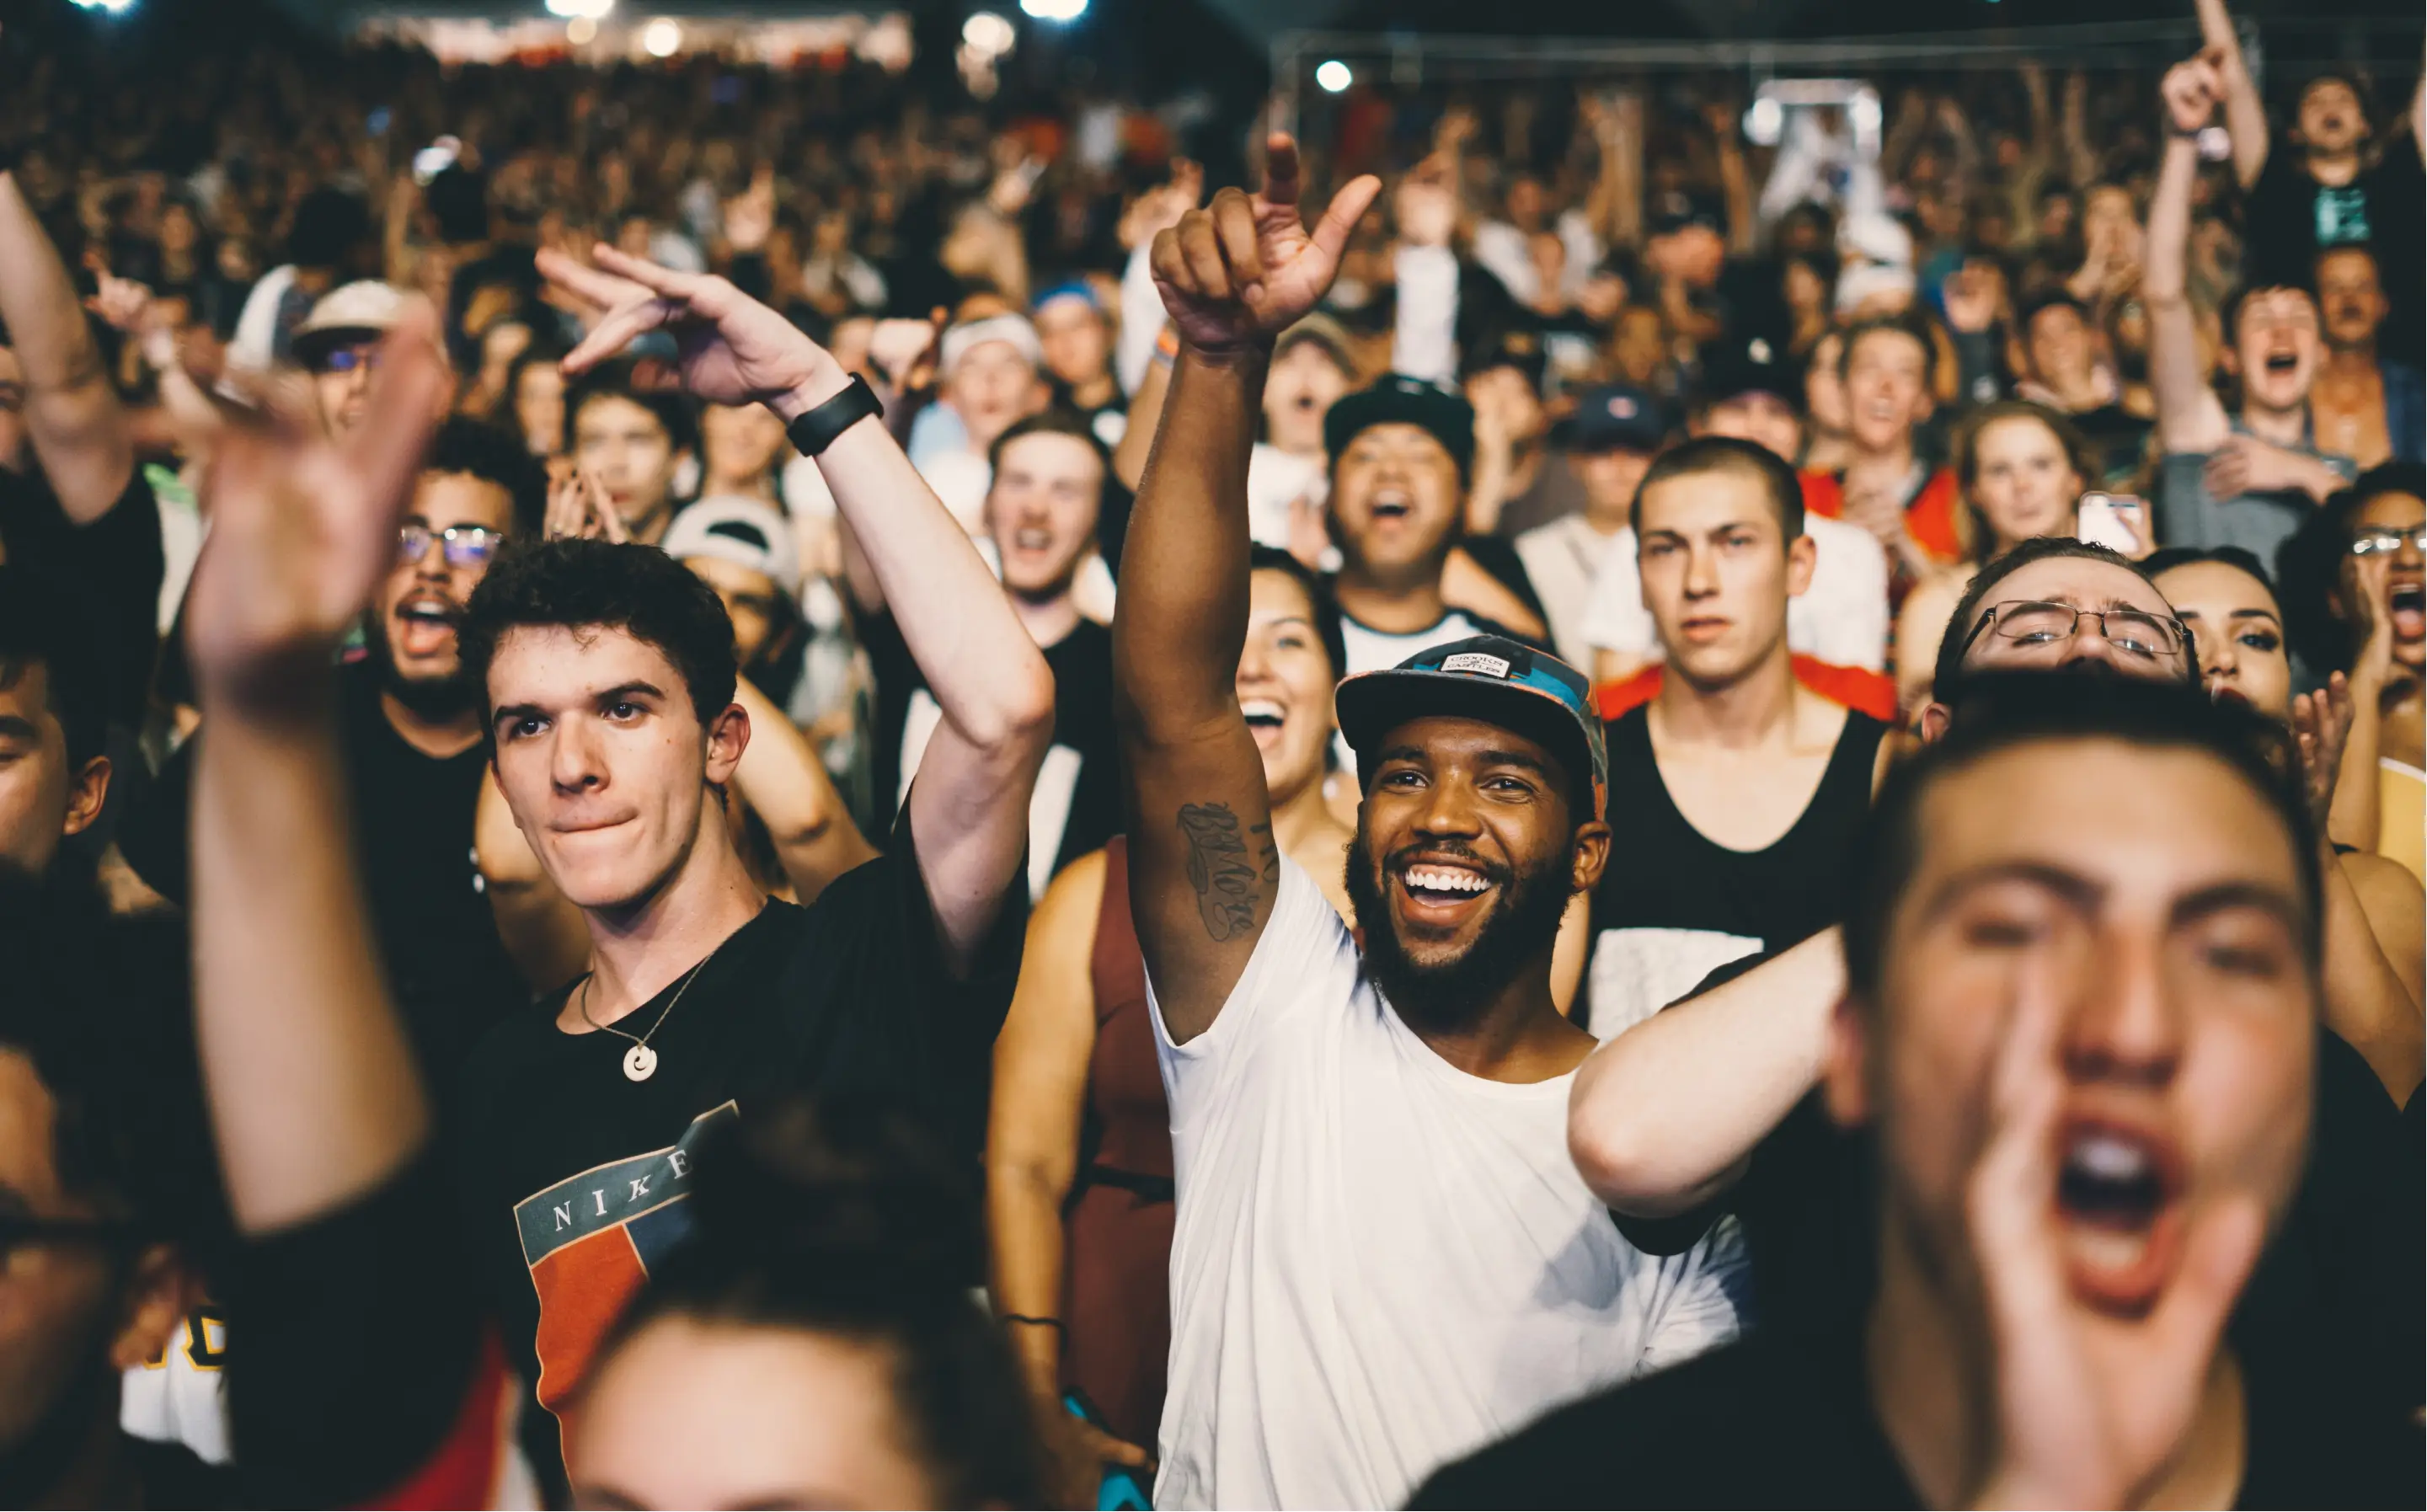 A group of happy people in a crowd cheering at a music event.